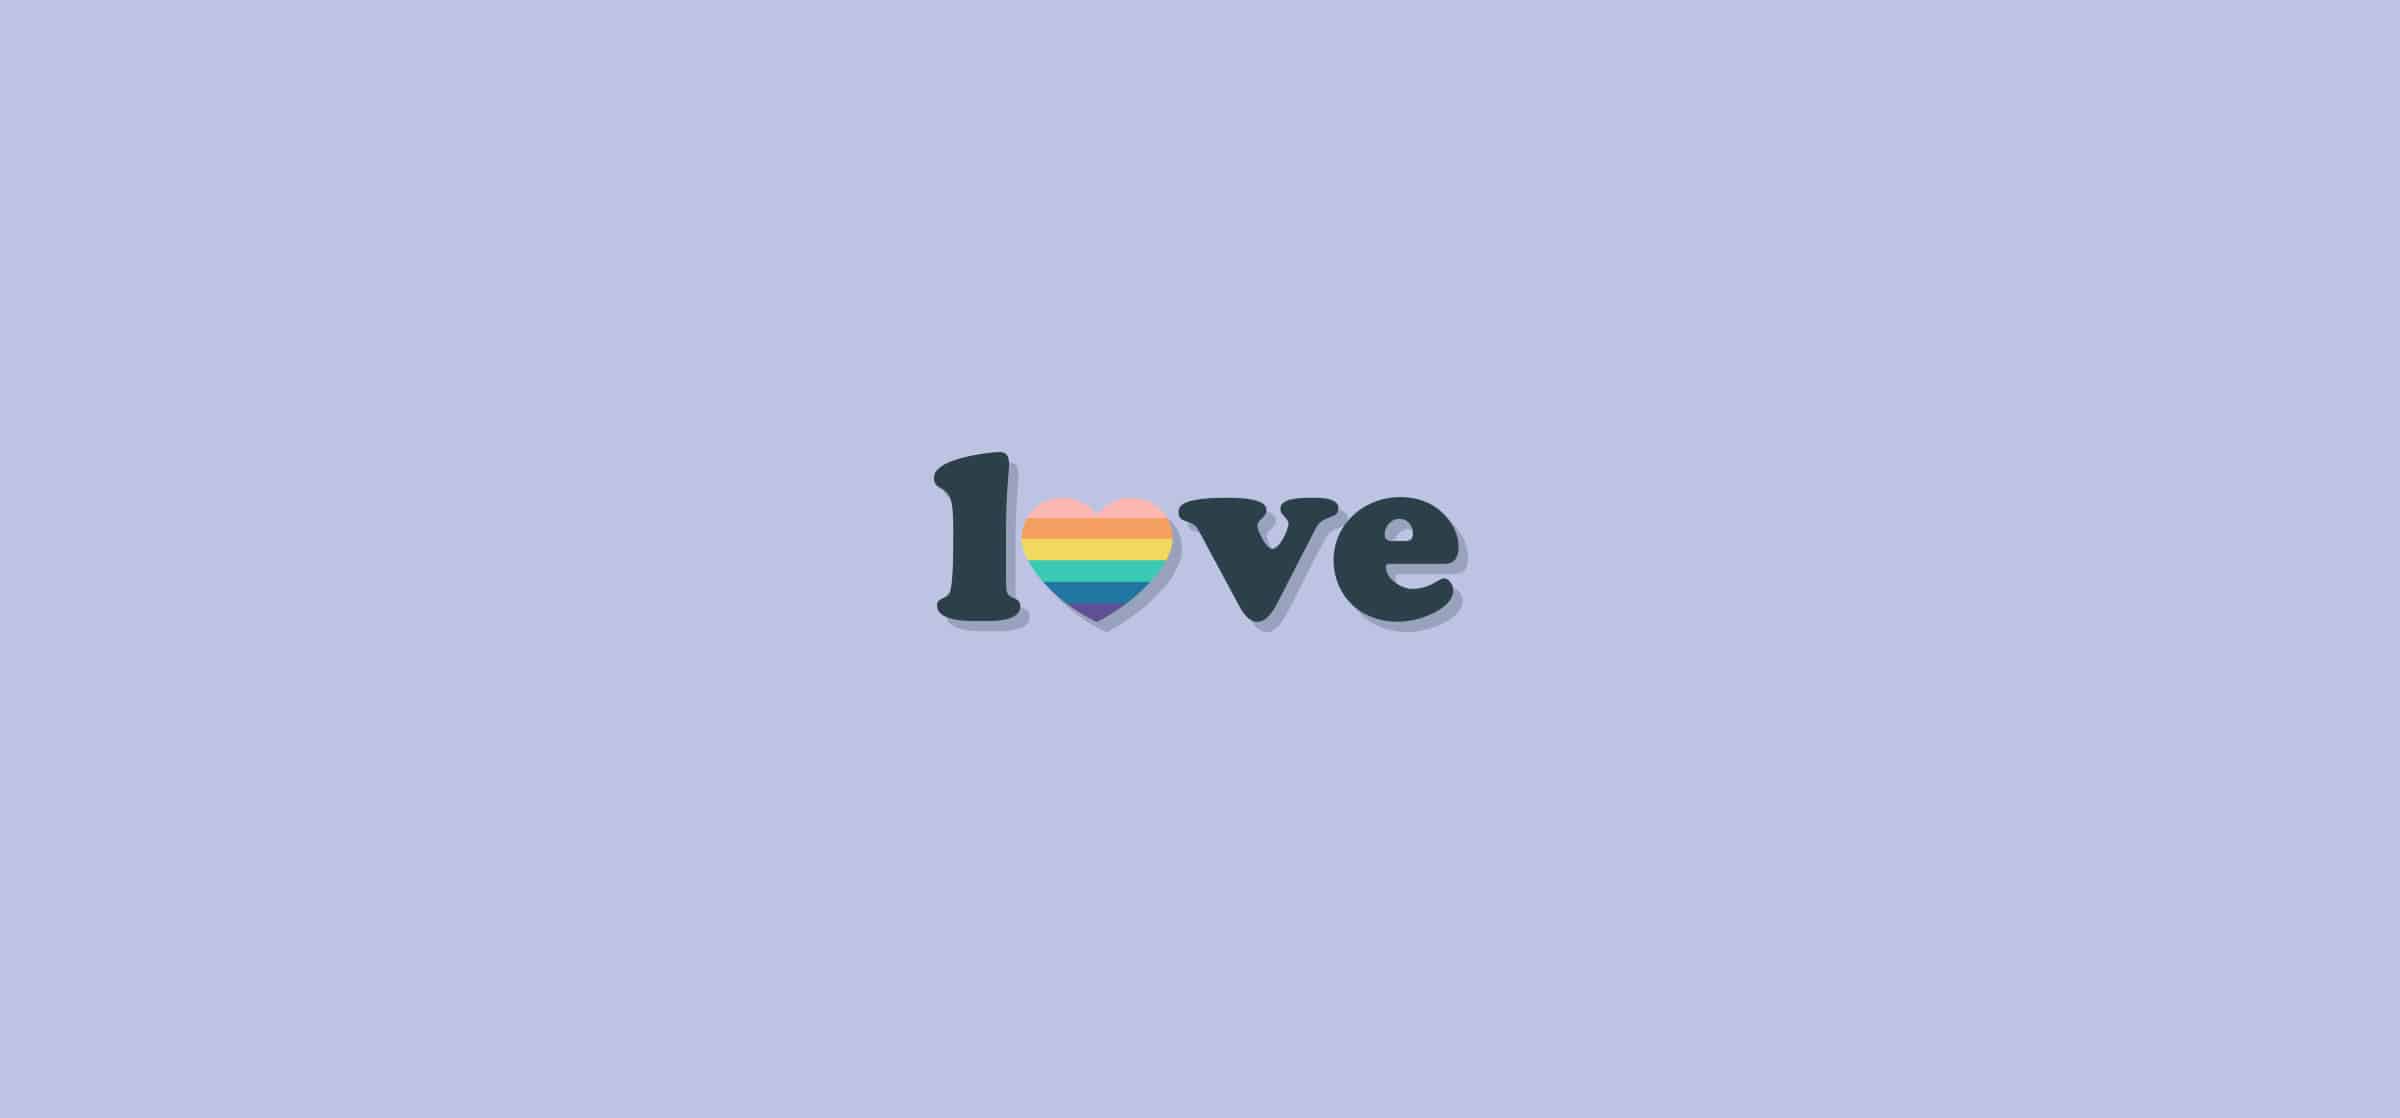 The word love, with the letter O replaced by a heart with rainbow colors, representing diversity